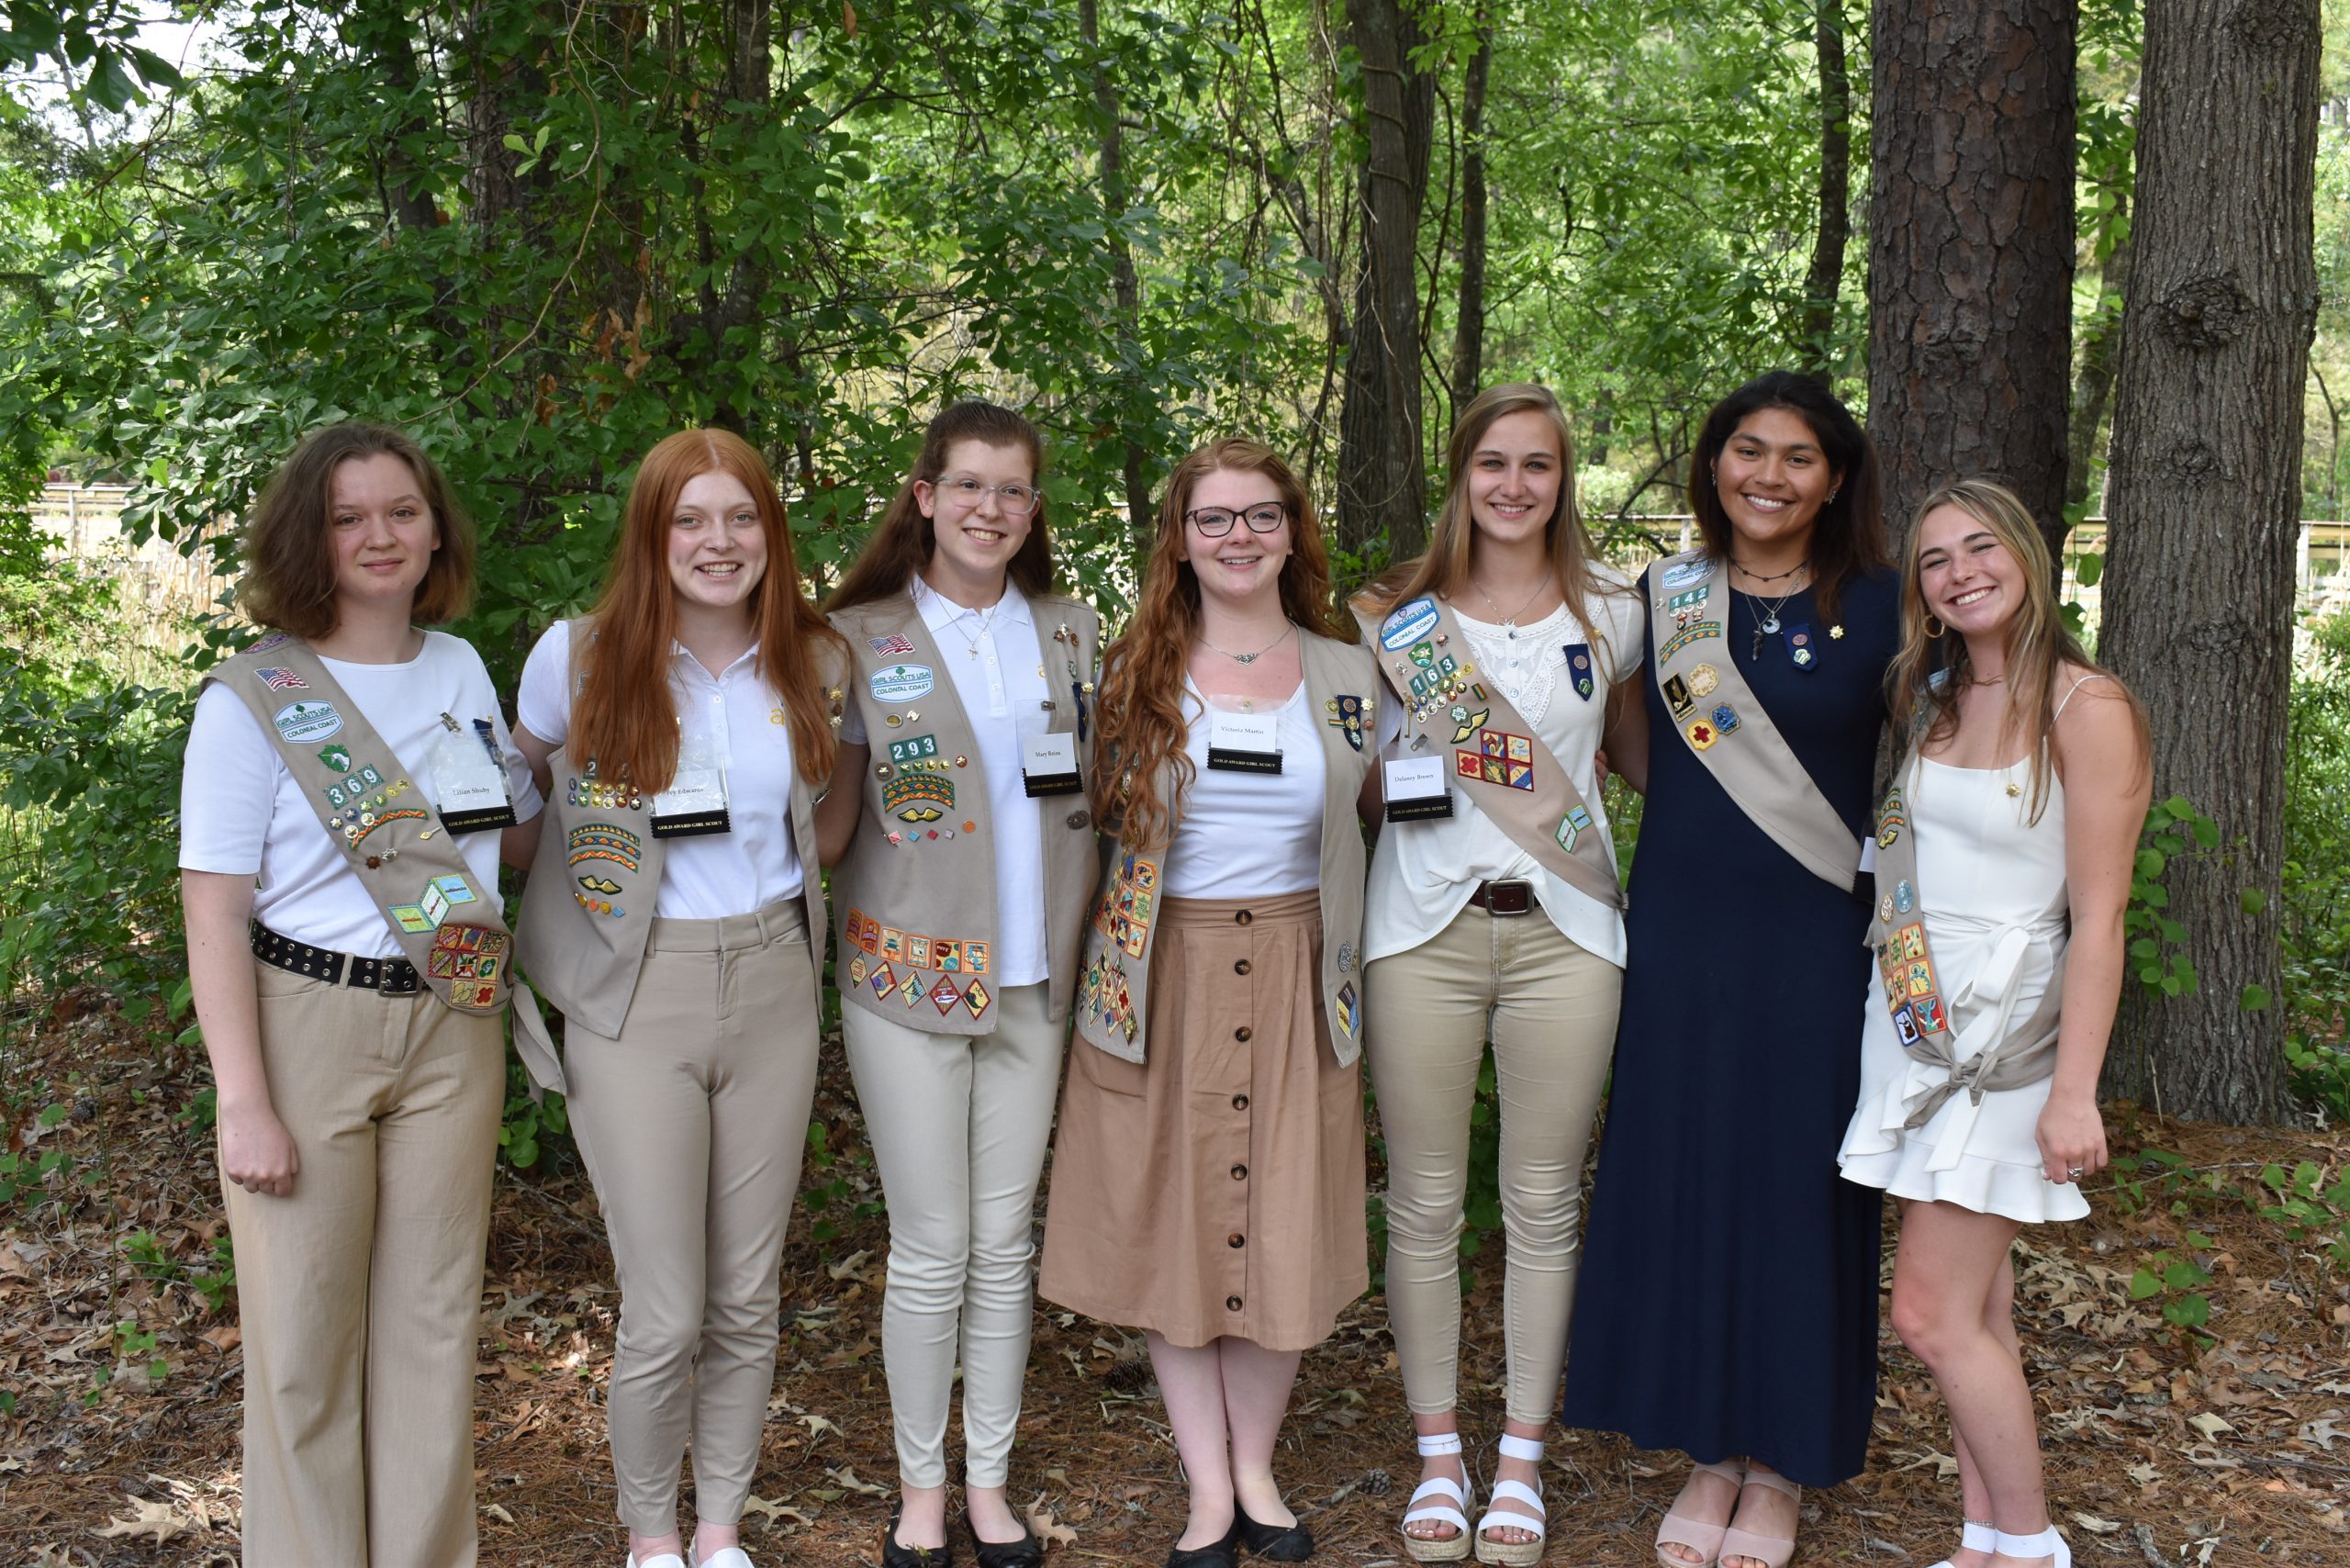 Eight Virginia Beach Girl Scouts Earn Highest Honor in Girl Scouts: The Gold Award